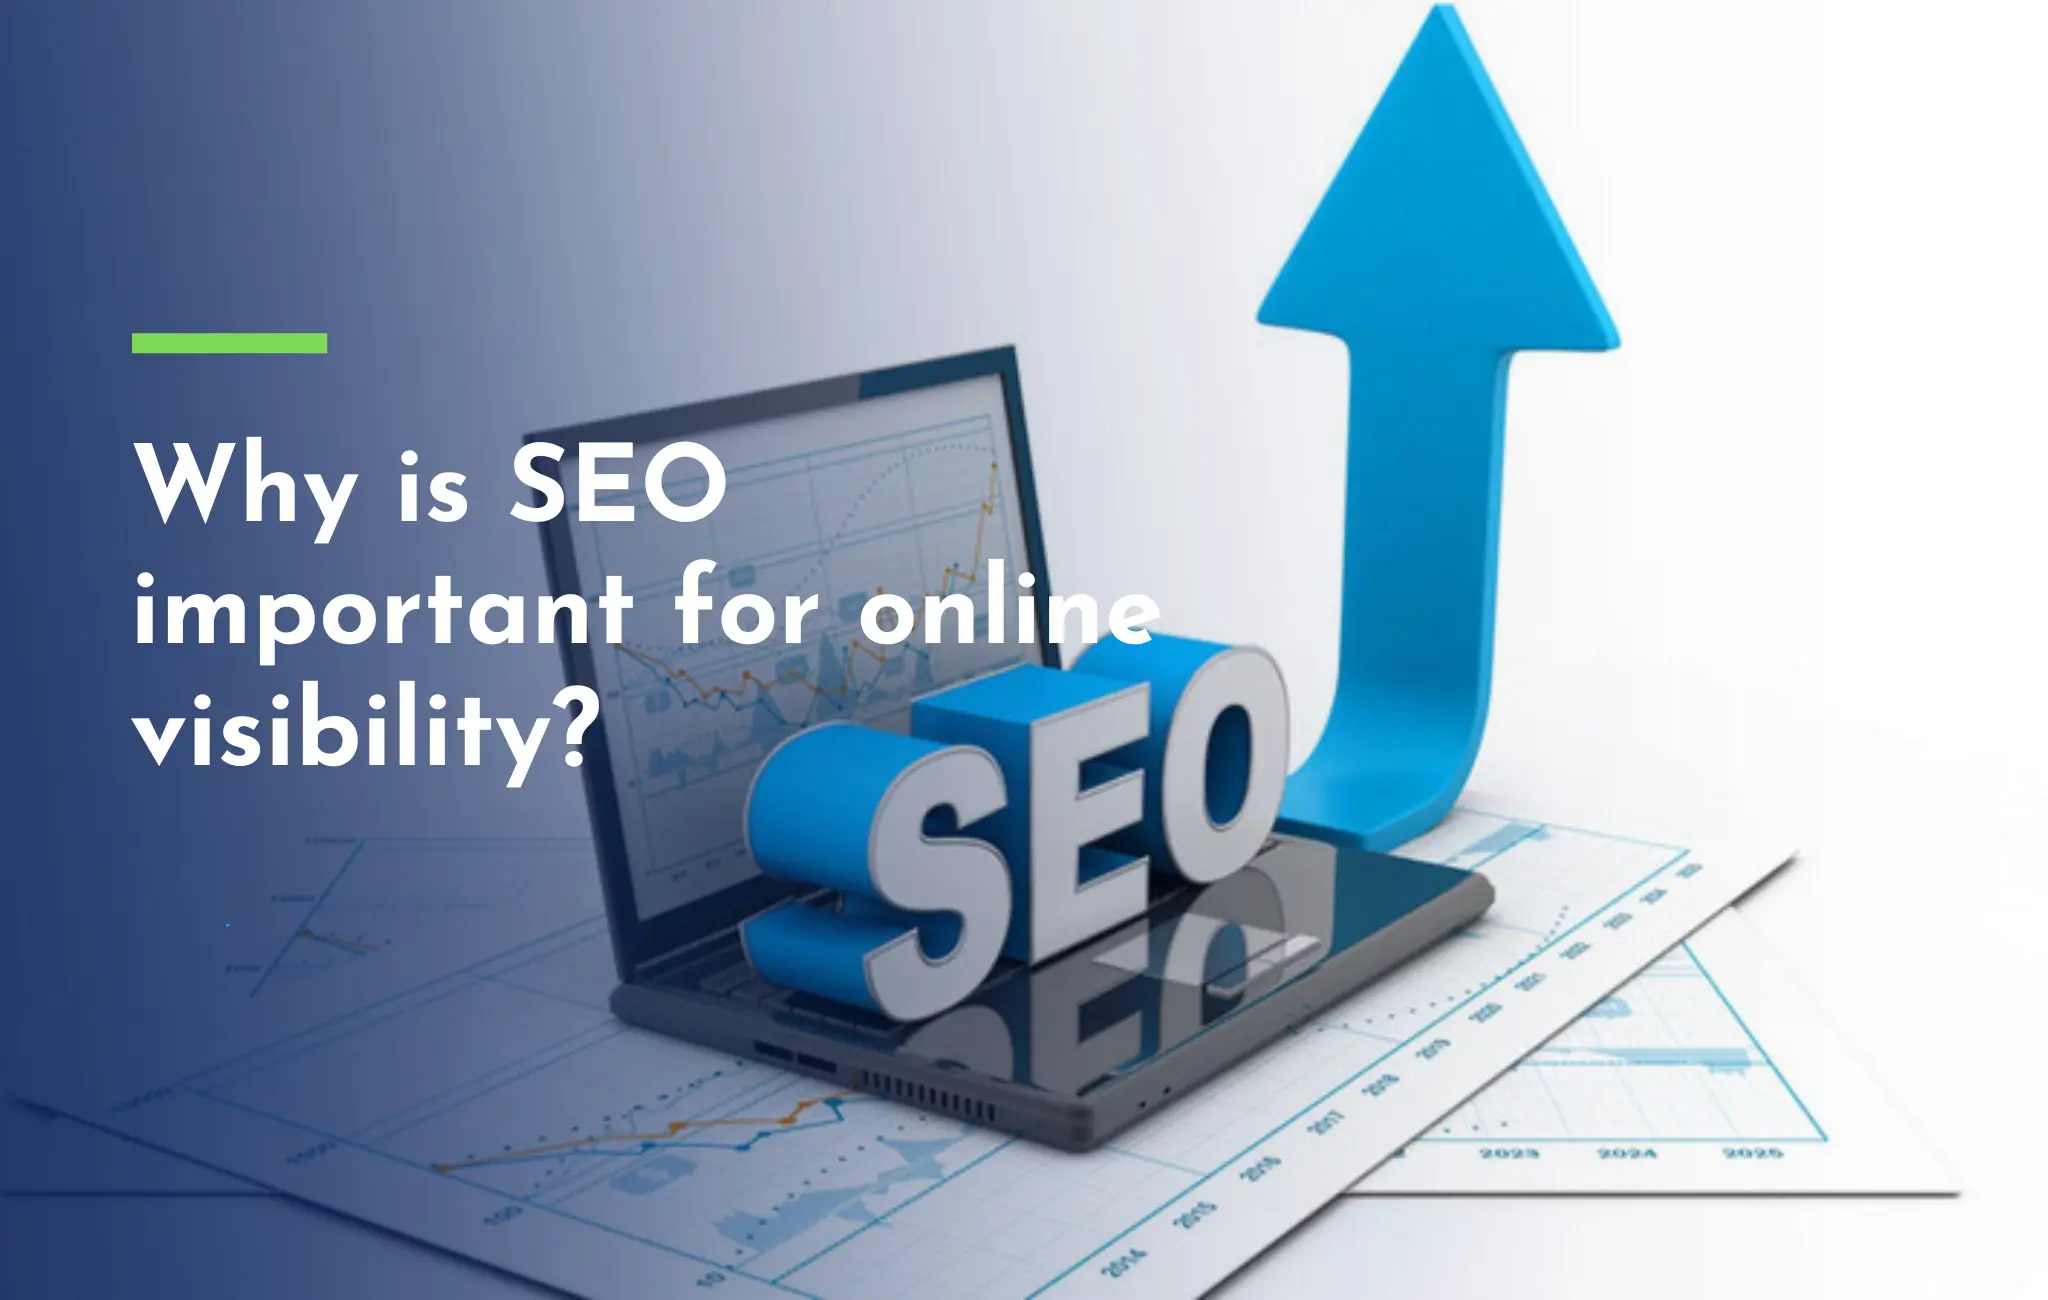 Why is SEO important for online visibility?